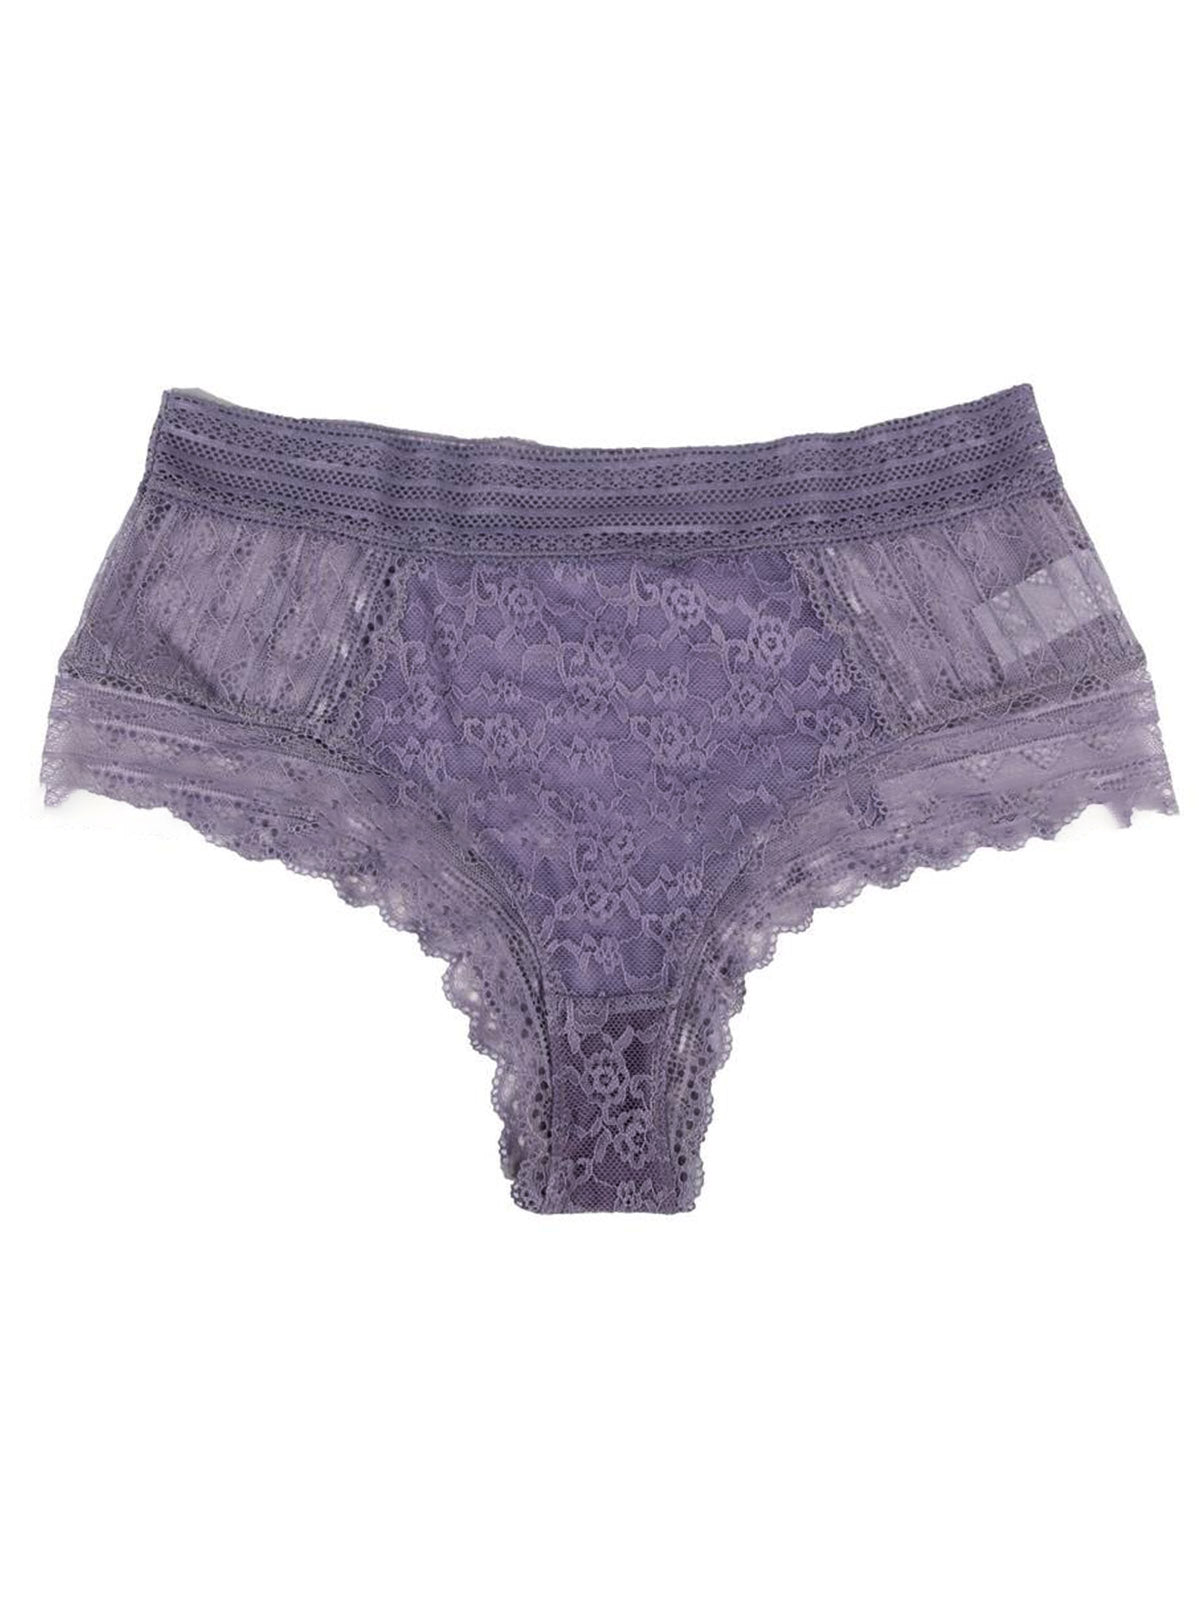 Sexy Floral High Waist Lace Panty